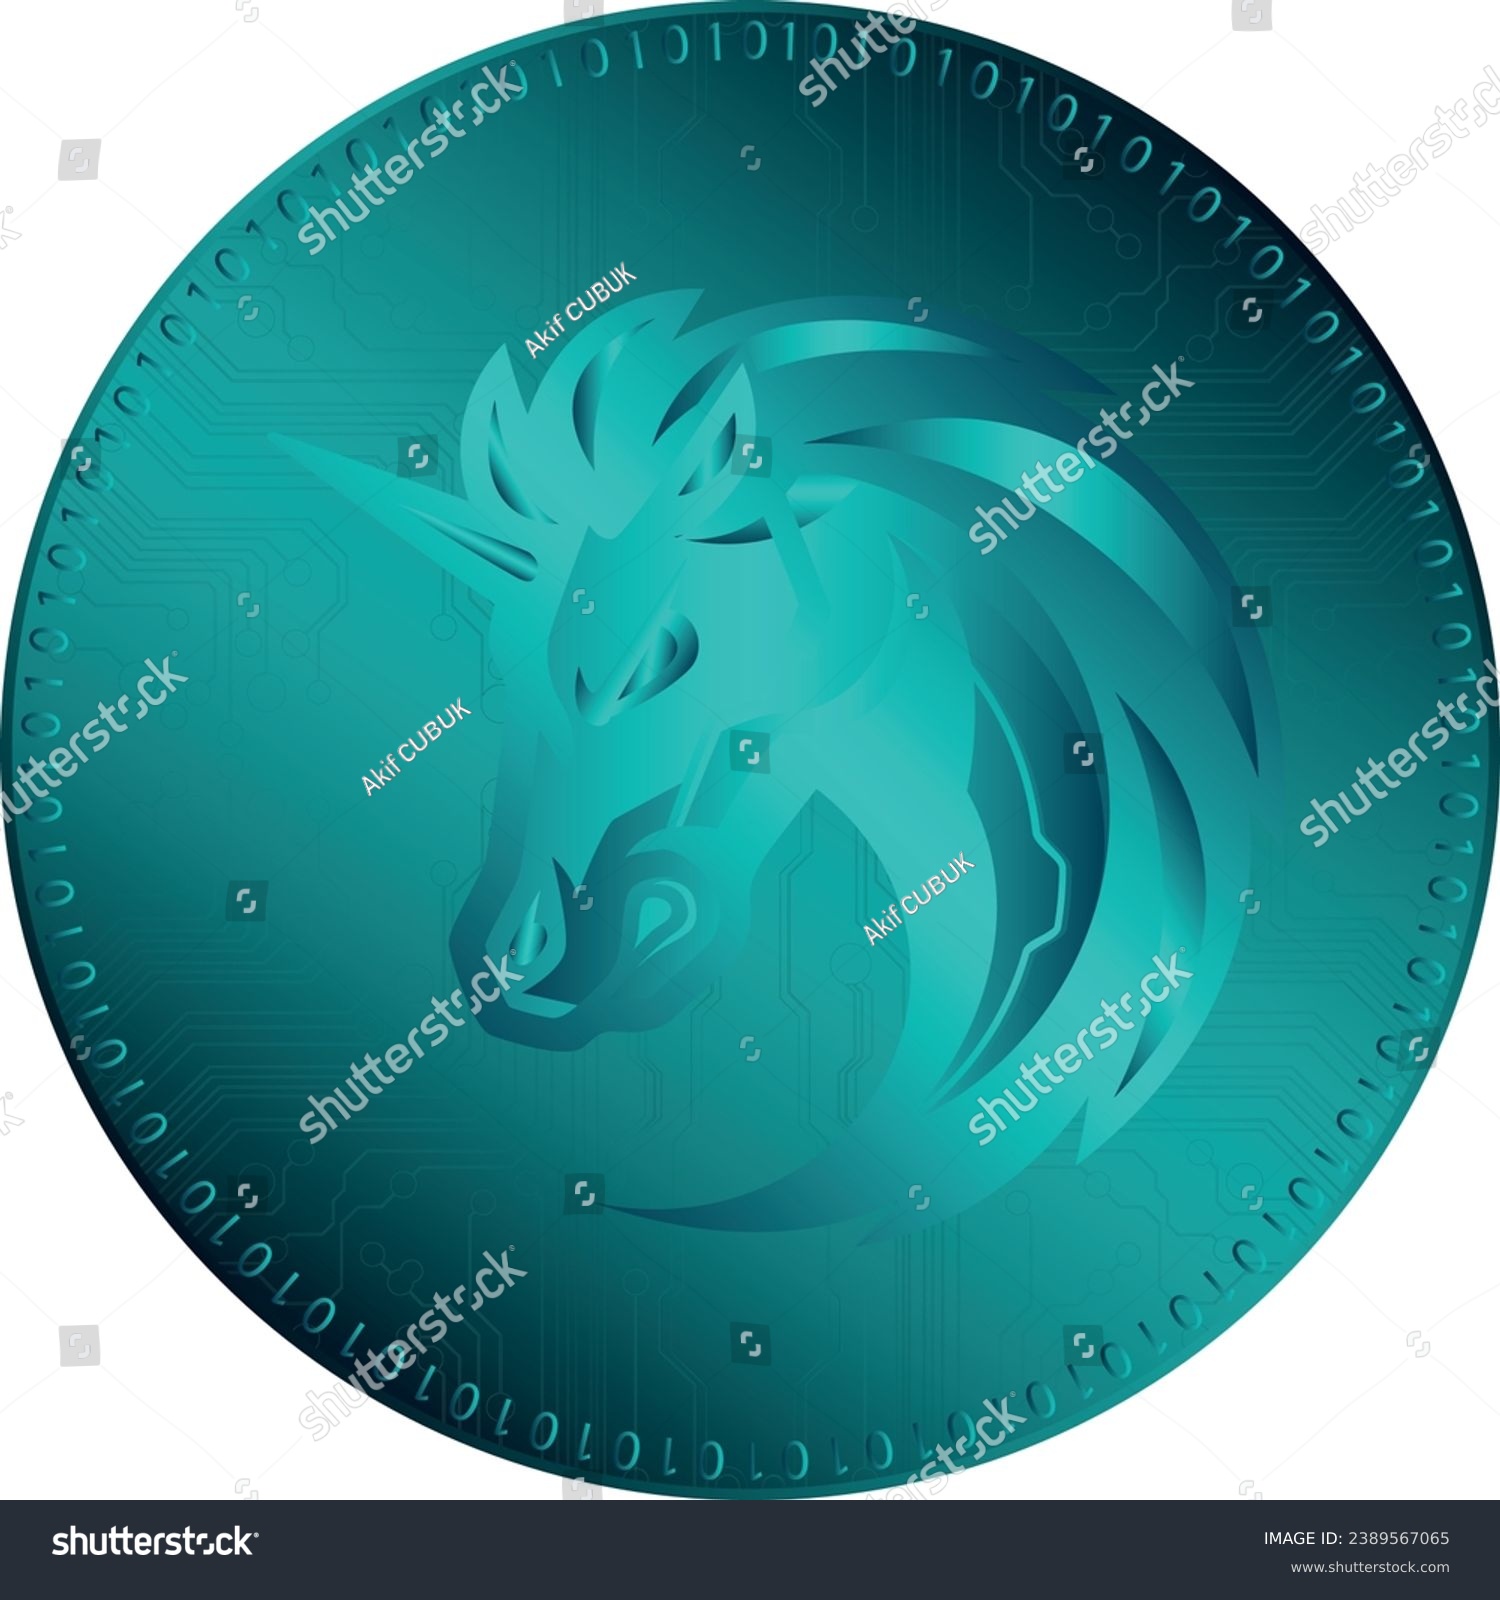 SVG of Cryptocurrency logos in colorful circle. vector logo images. 3d illustrations. svg